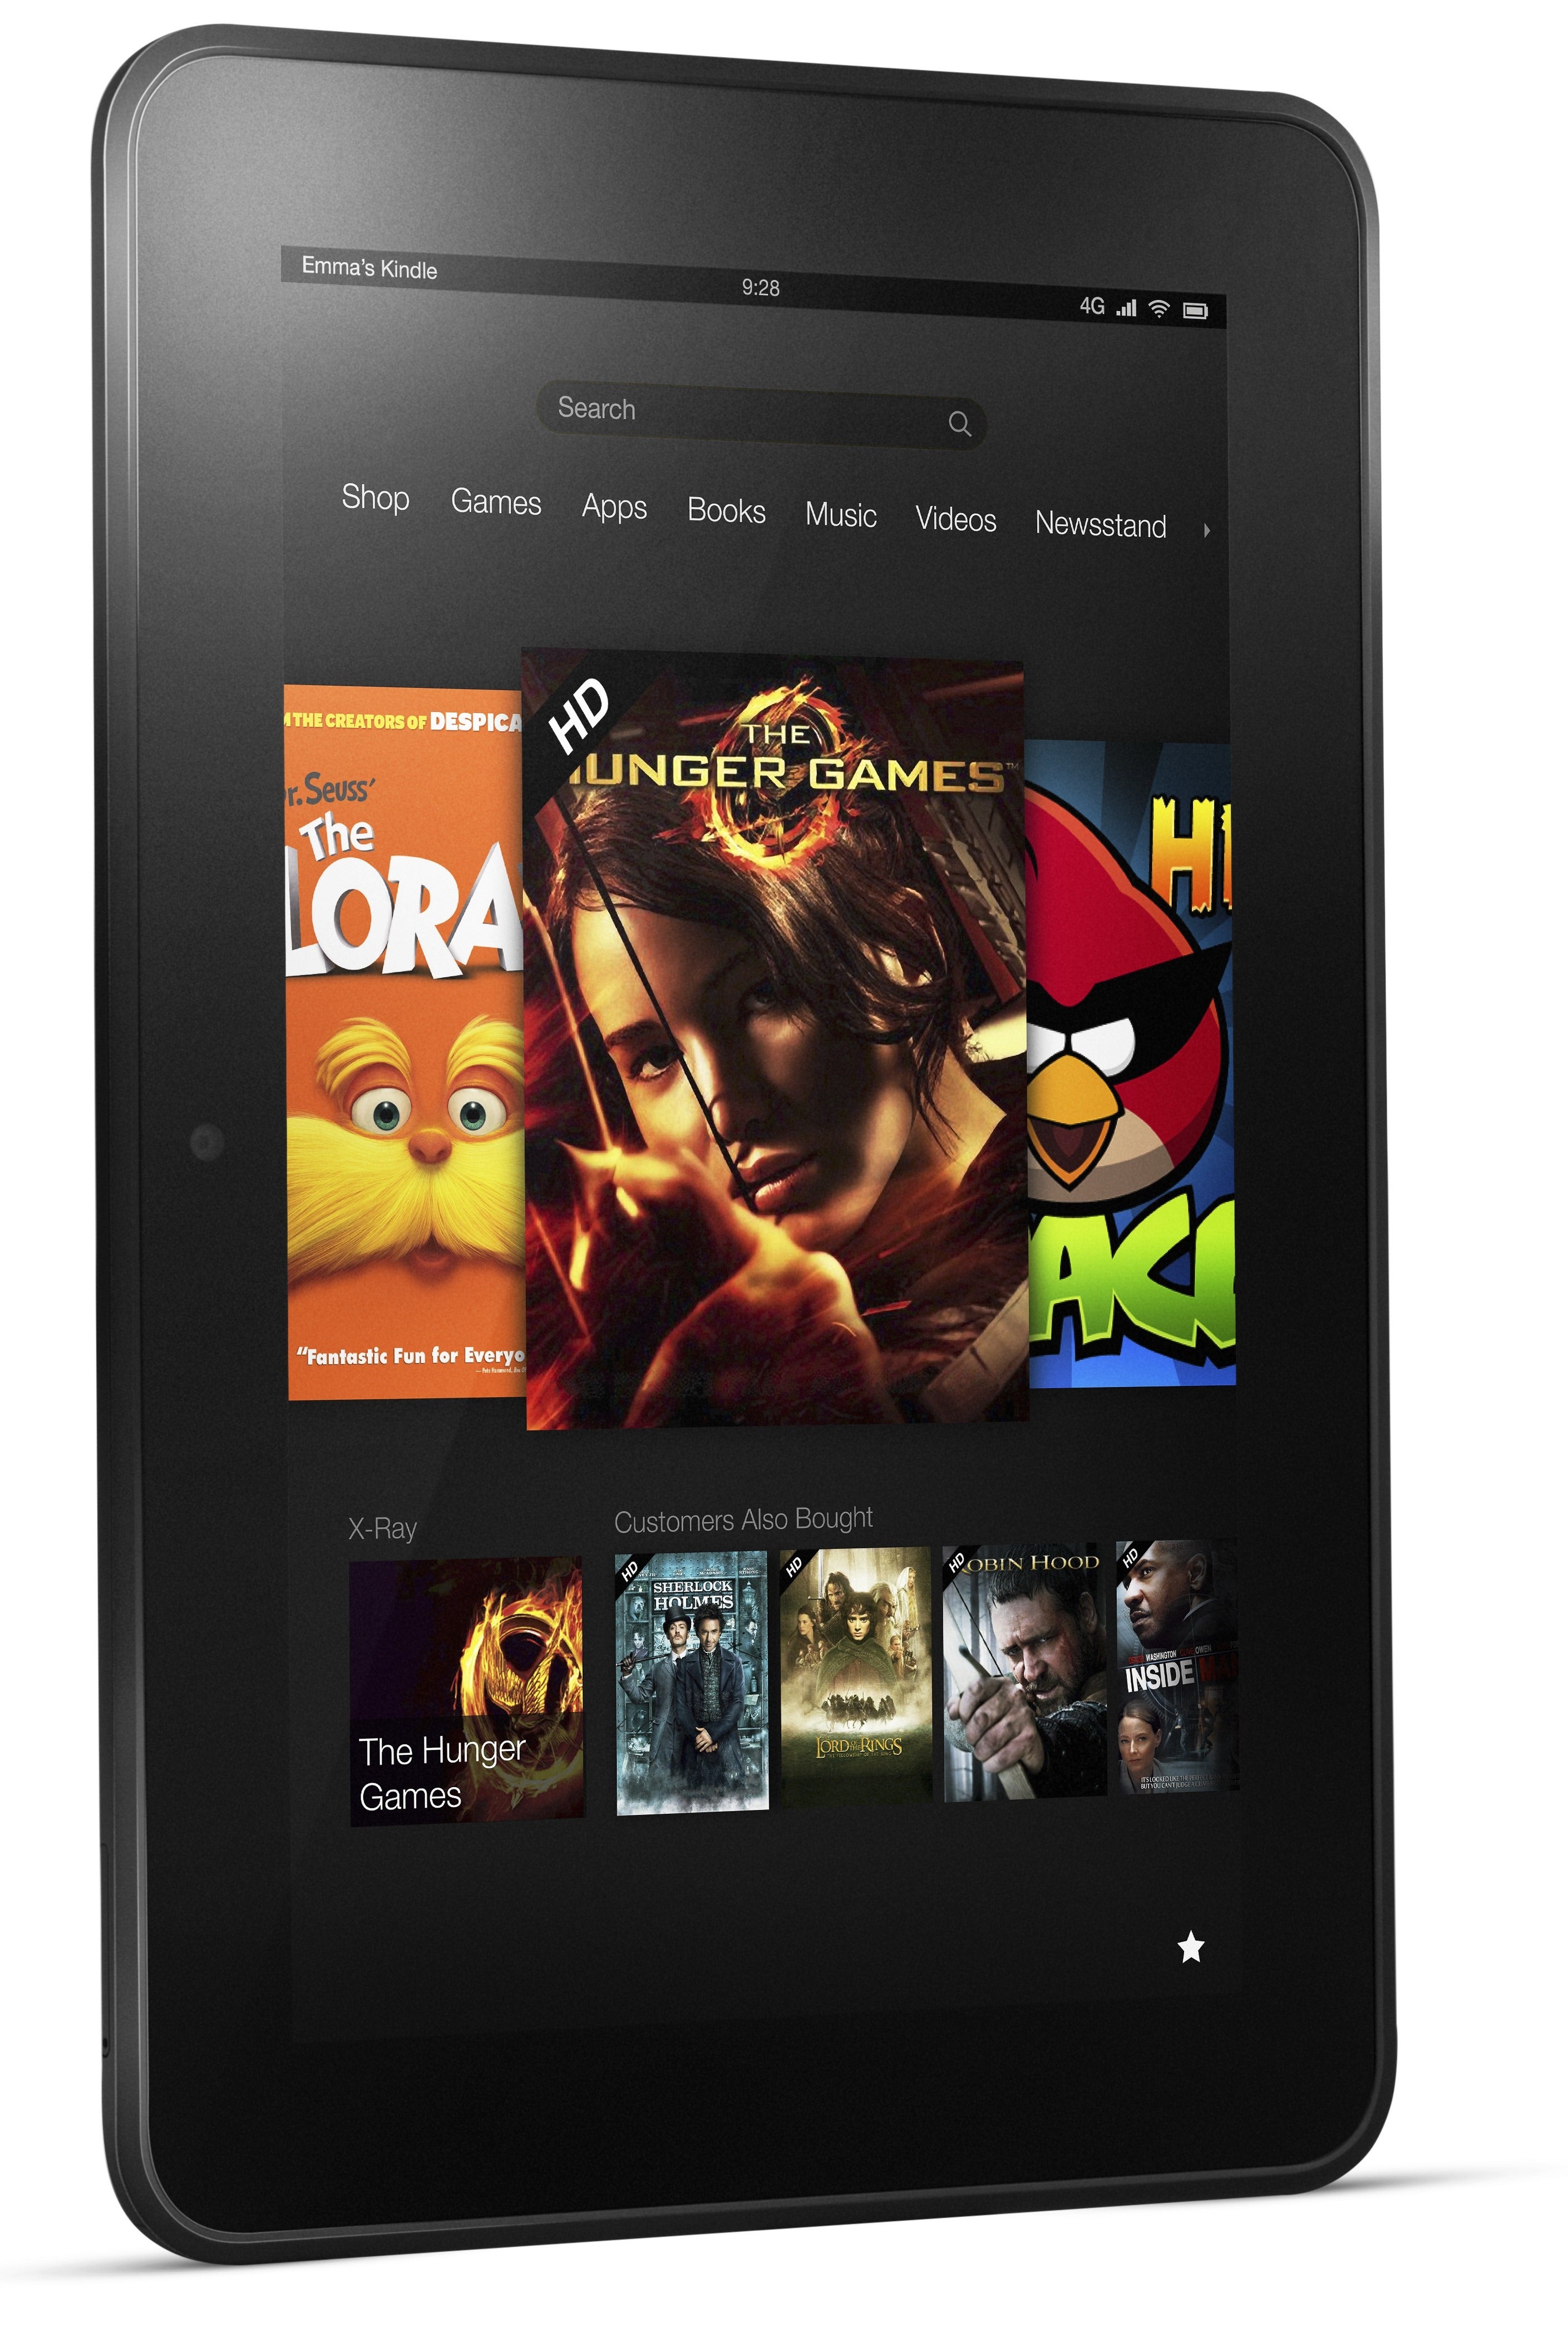 The Amazon Kindle Fire HD 8.9 4G LTE - AT&T to sell the Amazon Kindle Fire HD 8.9 4G LTE starting April 5th